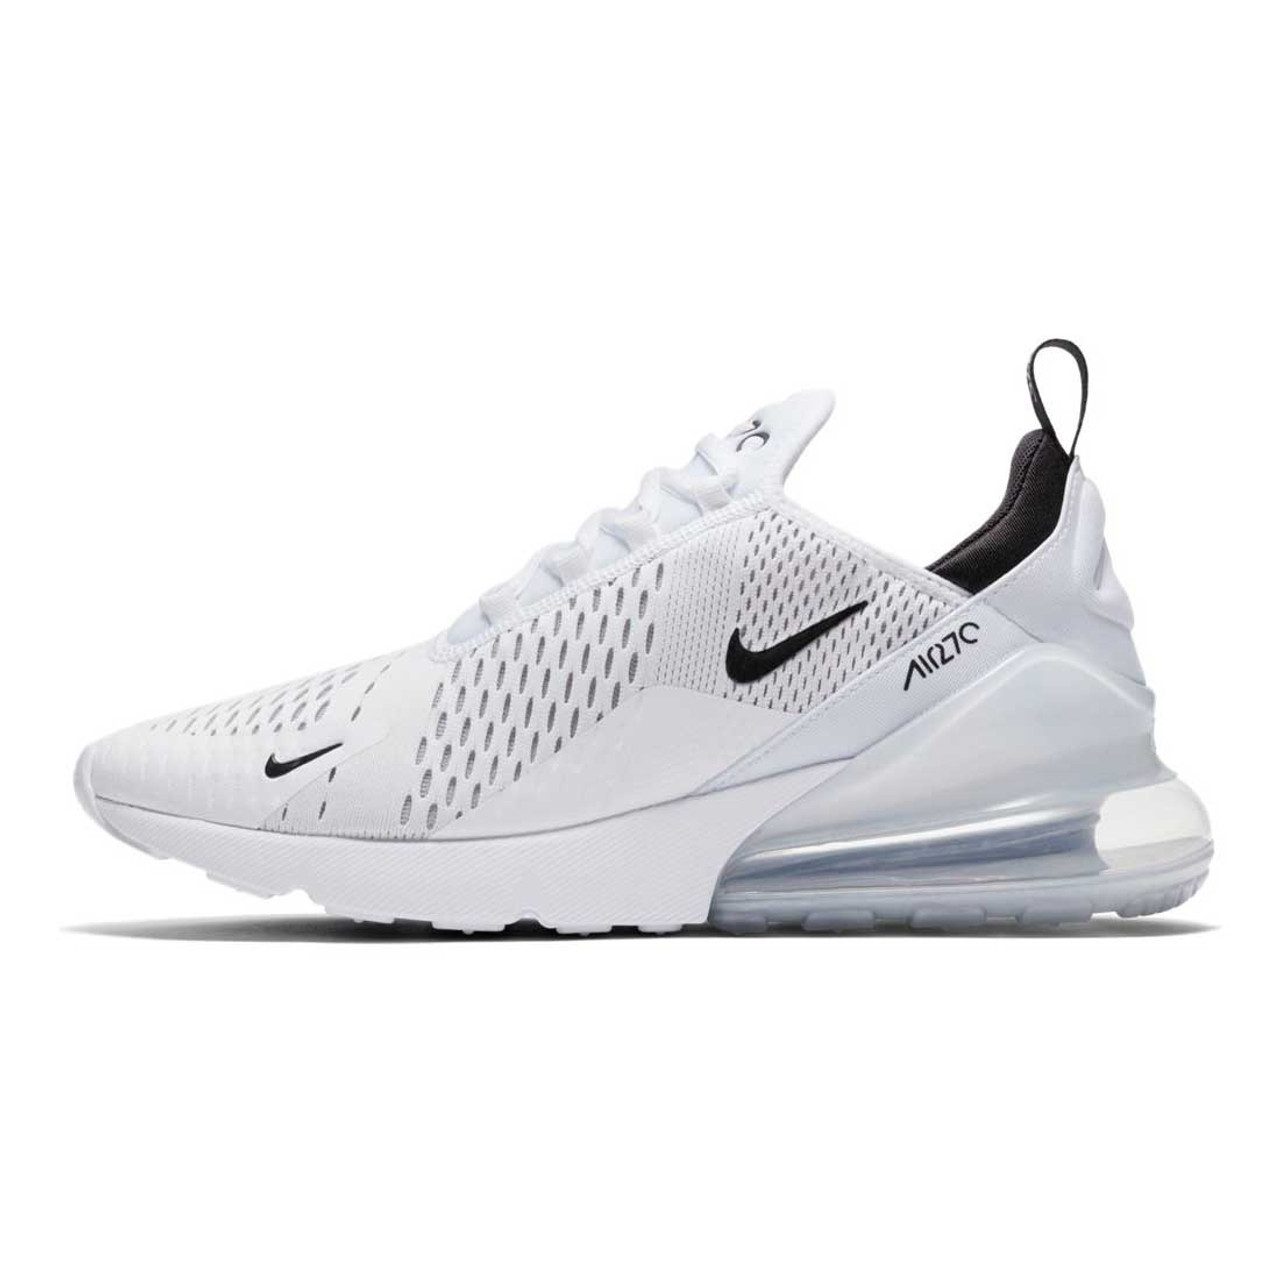 Smeltend diepvries Zwerver Nike Men's White/Black Air Max 270 Shoes $ 159.99 | TYLER'S